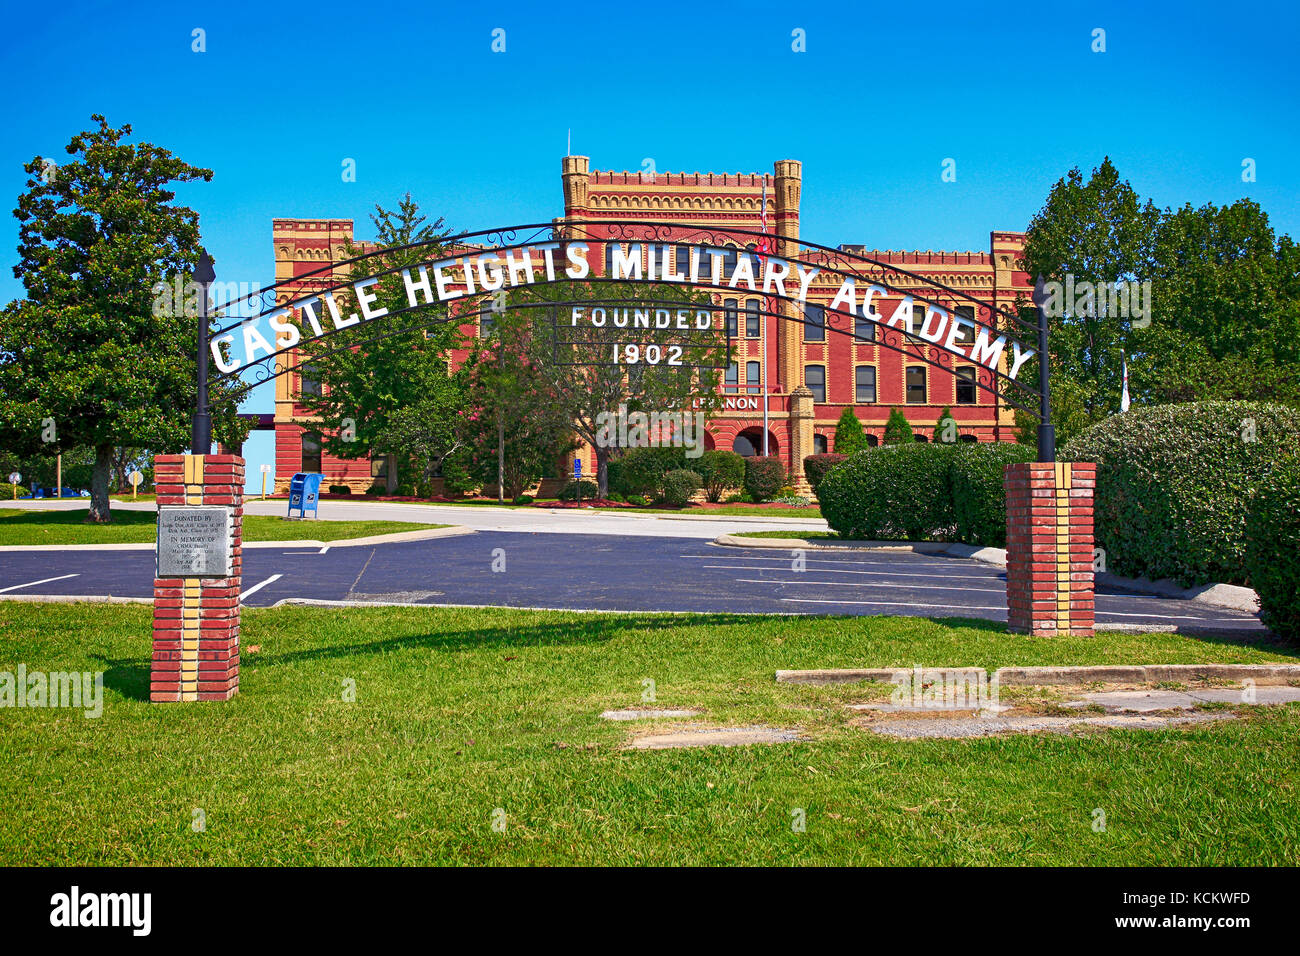 The archway to the once Castle Heights Military Academy in Lebanon TN, USA Stock Photo